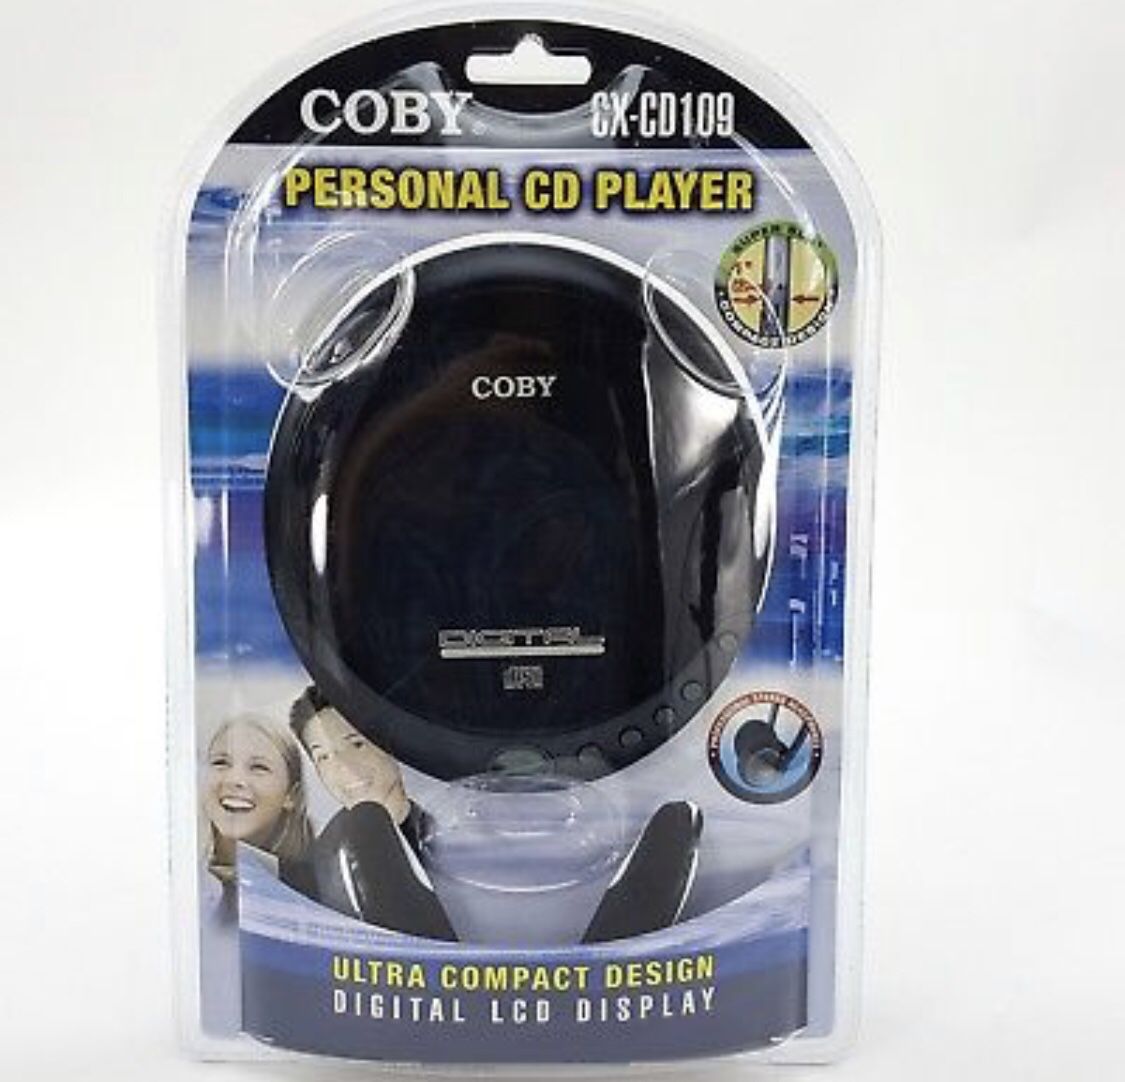 Coby personal CD player walk man